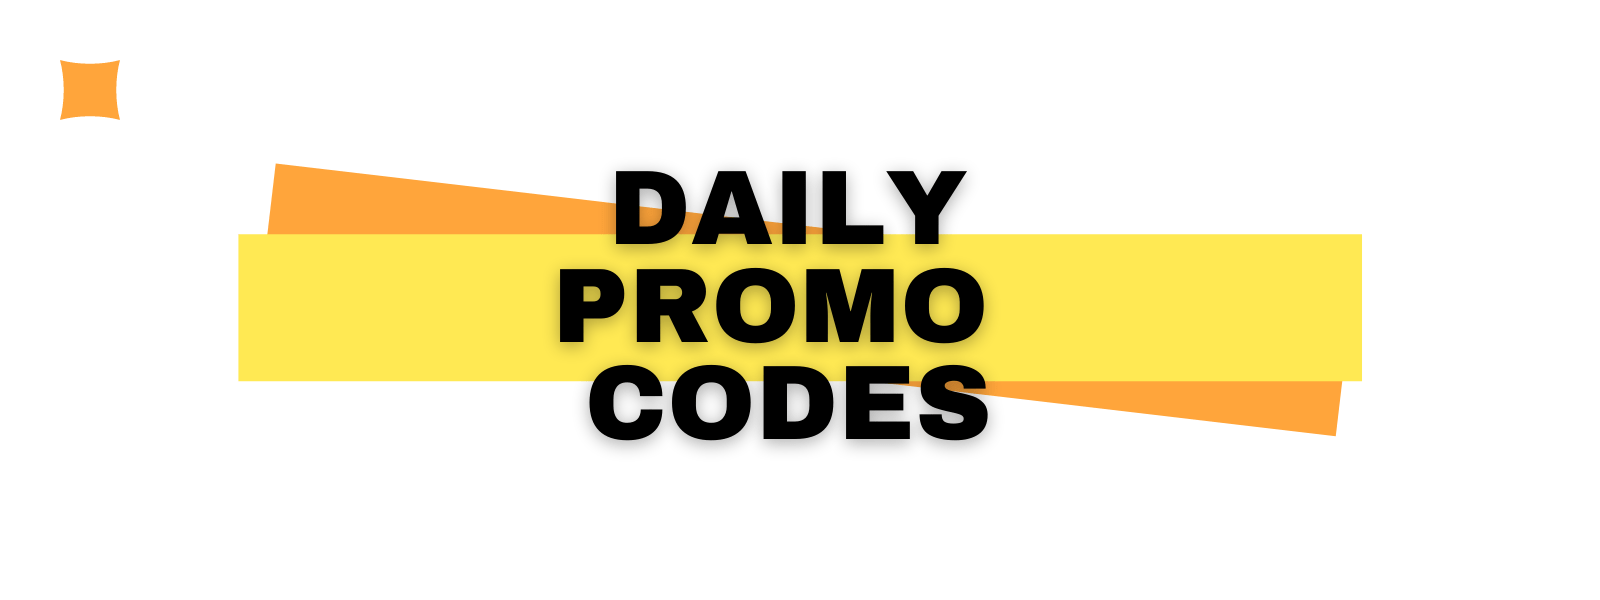 Daily Promo Codes